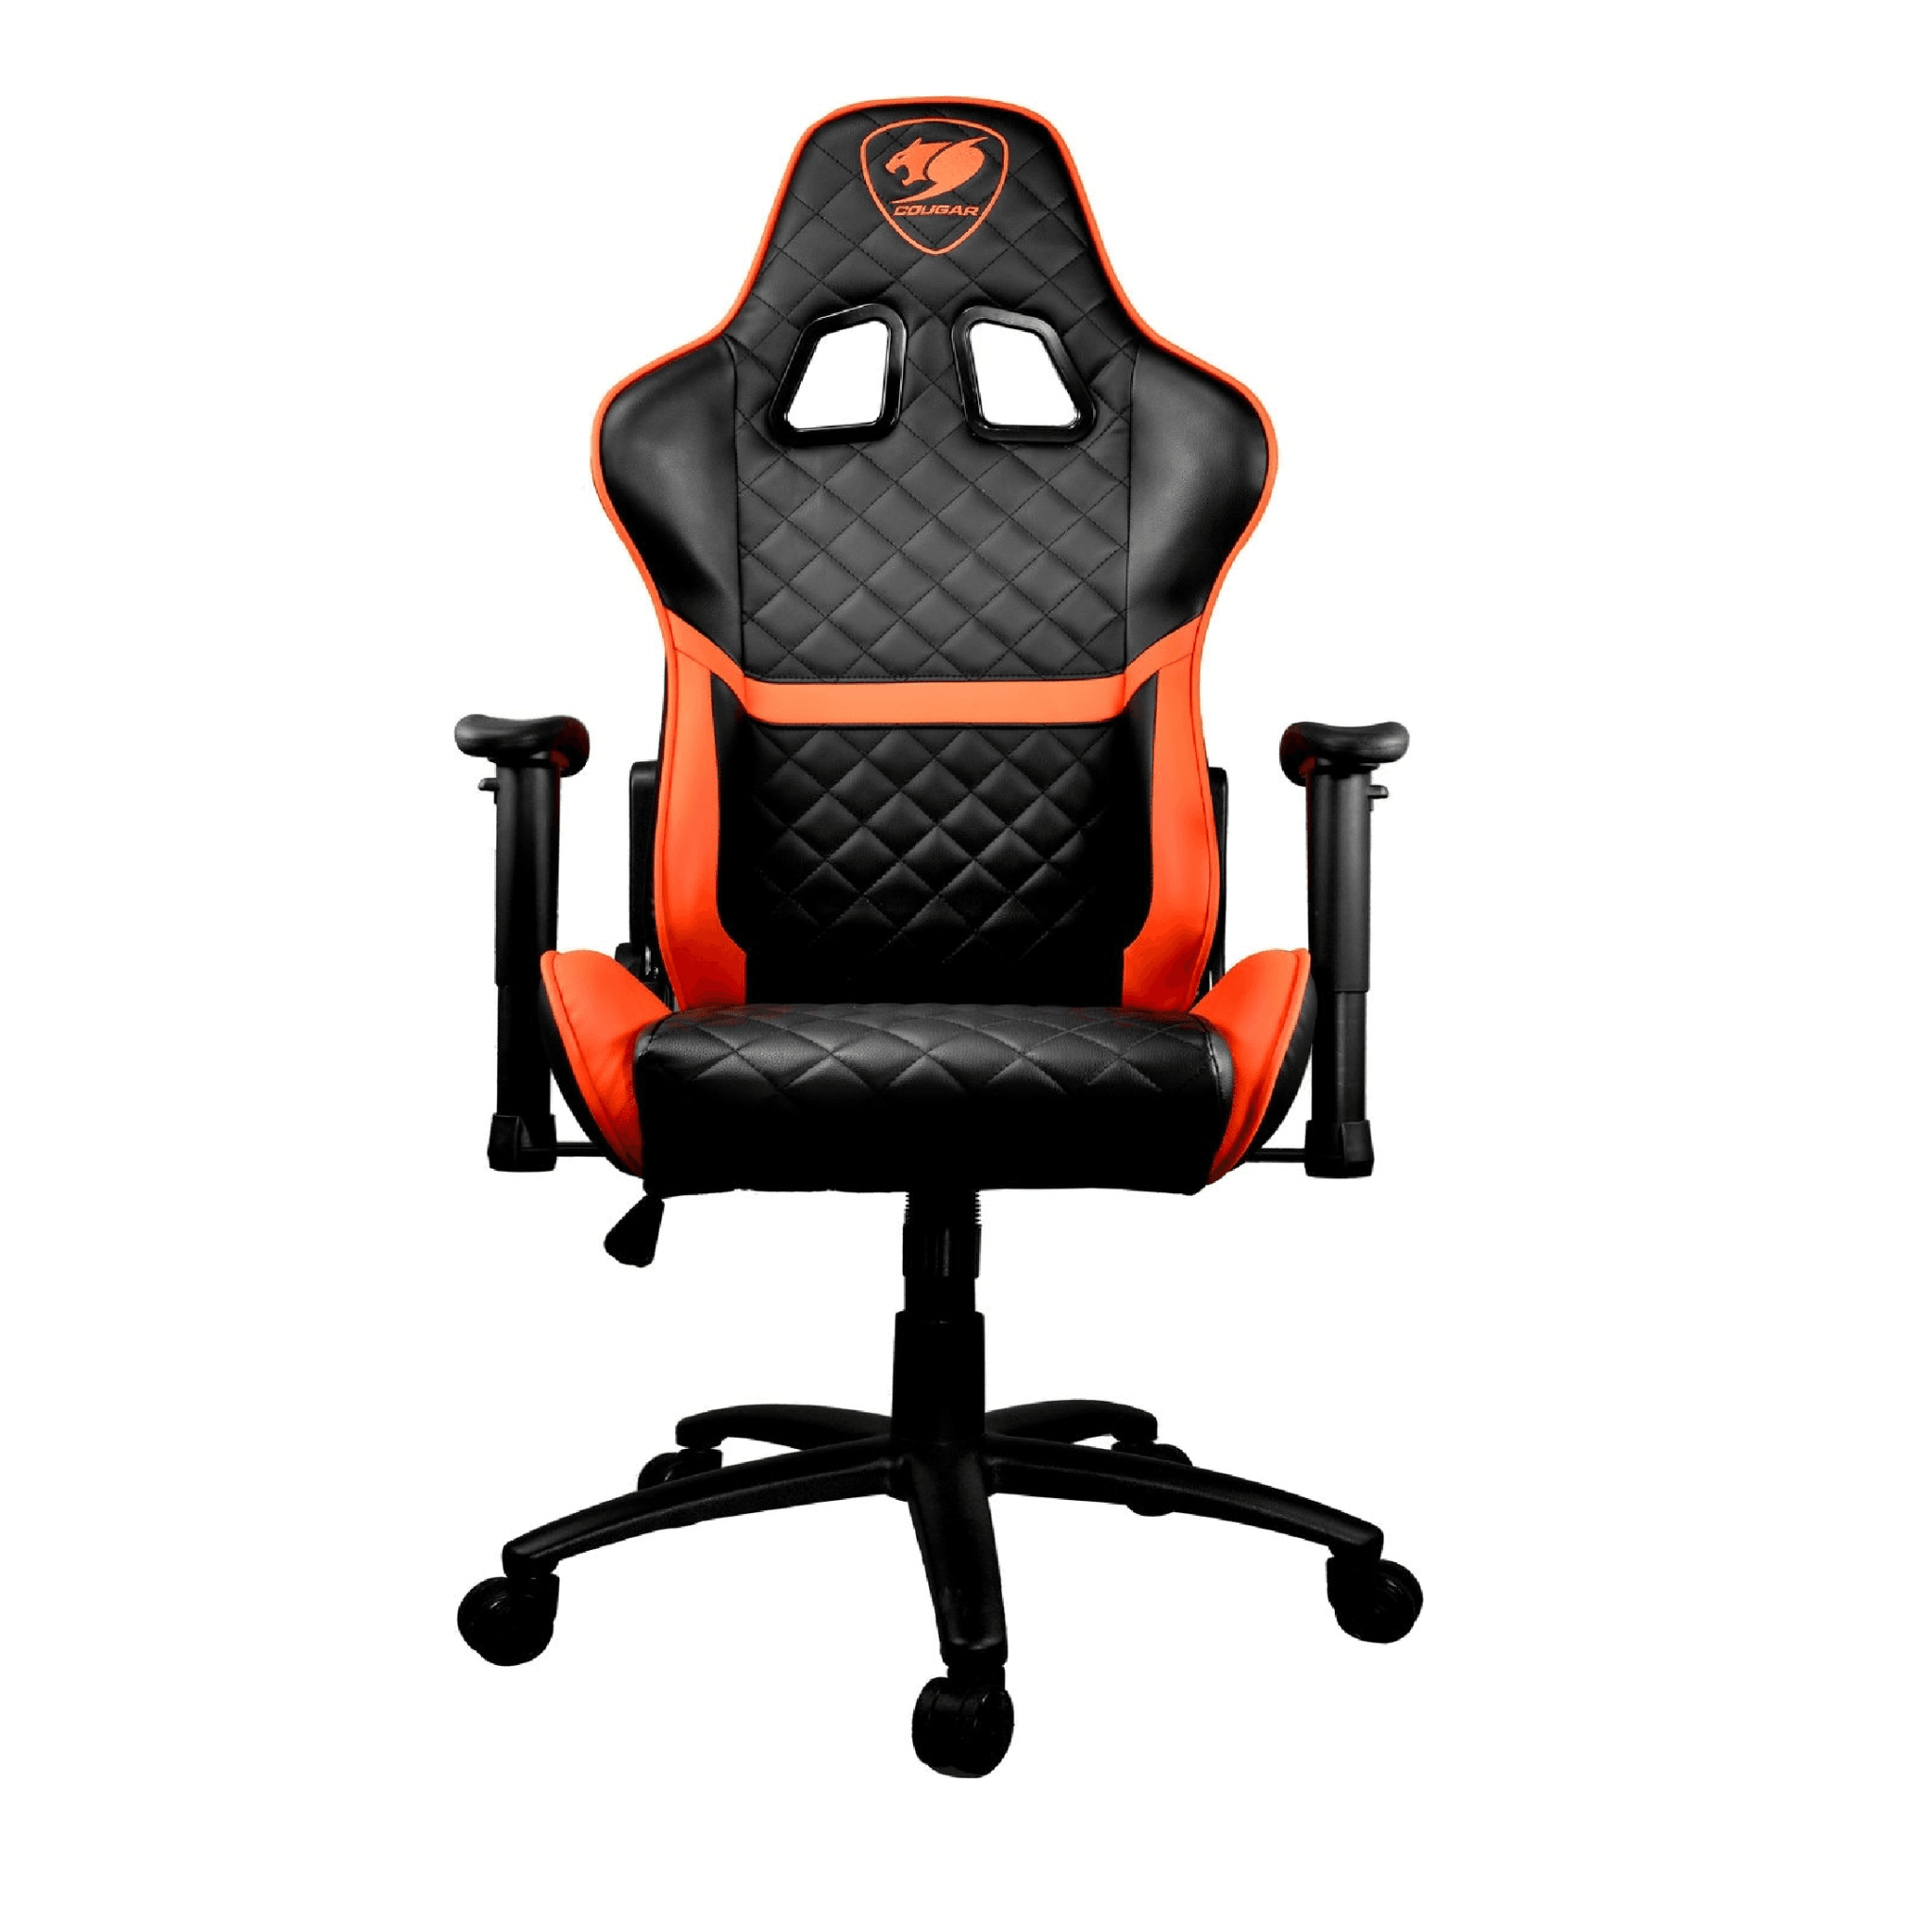 Cougar Armor One Series Gaming Chair - Orange - Store 974 | ستور ٩٧٤